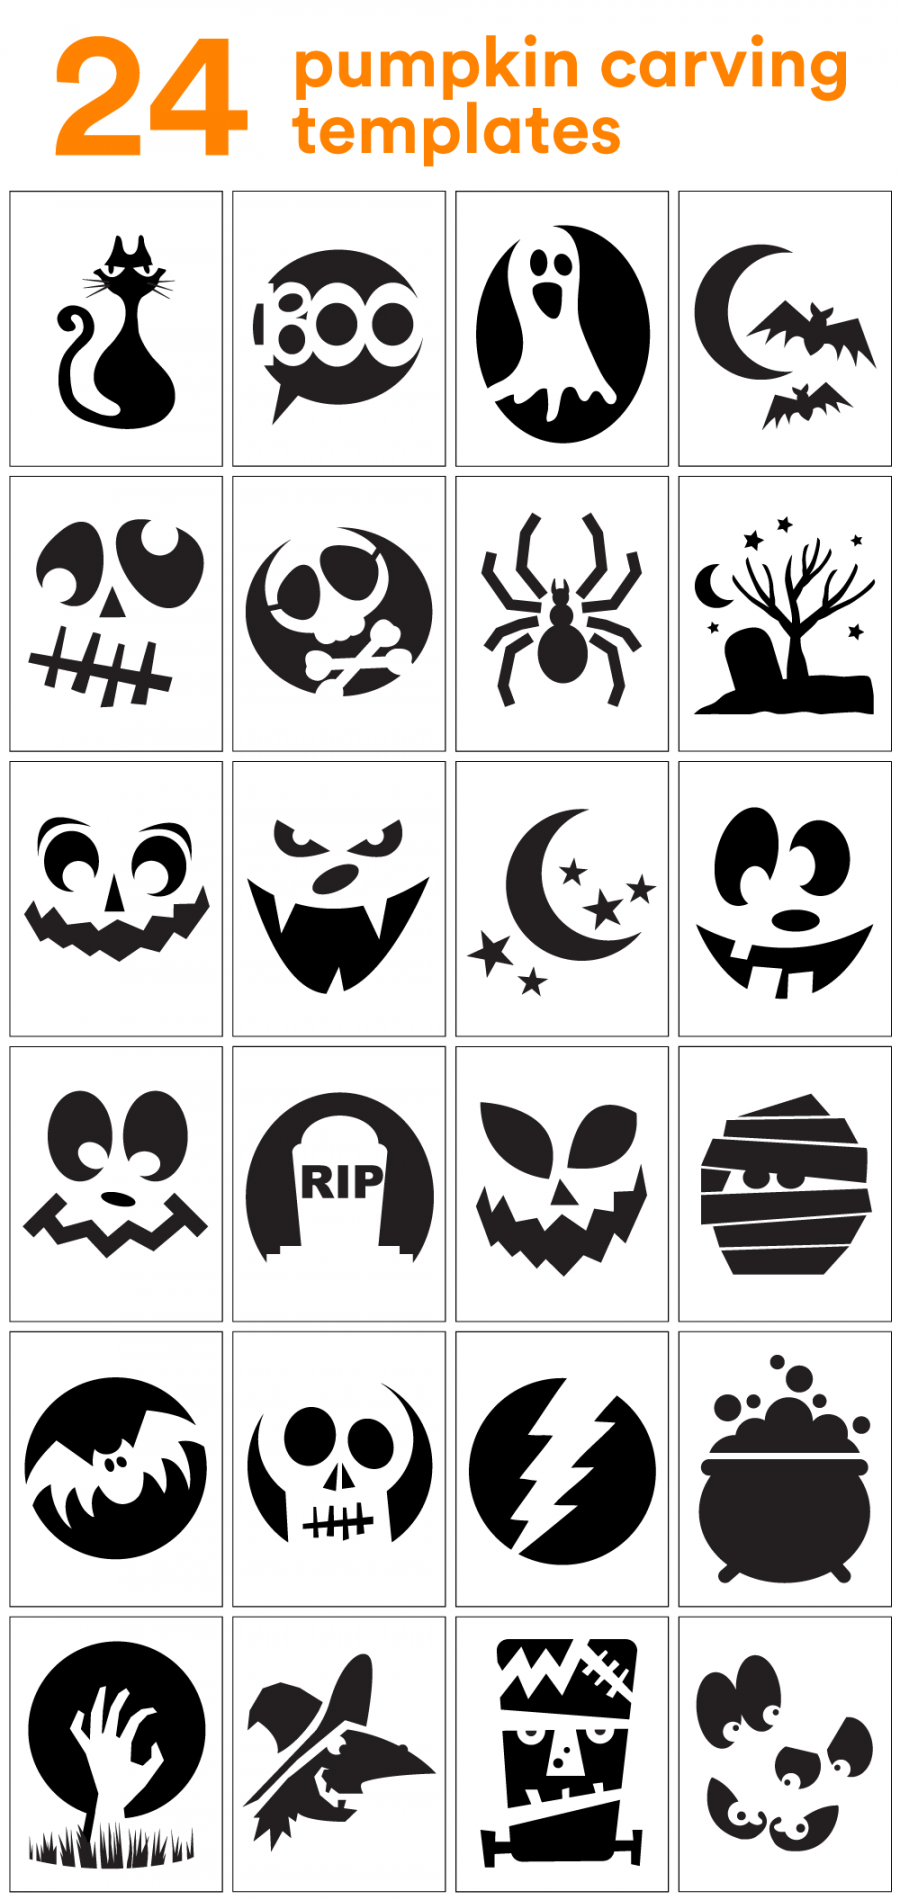 Pumpkin Carving Stencils Free Printables - Printable - How to Carve the Coolest Pumpkin on the Block (Carving Stencils